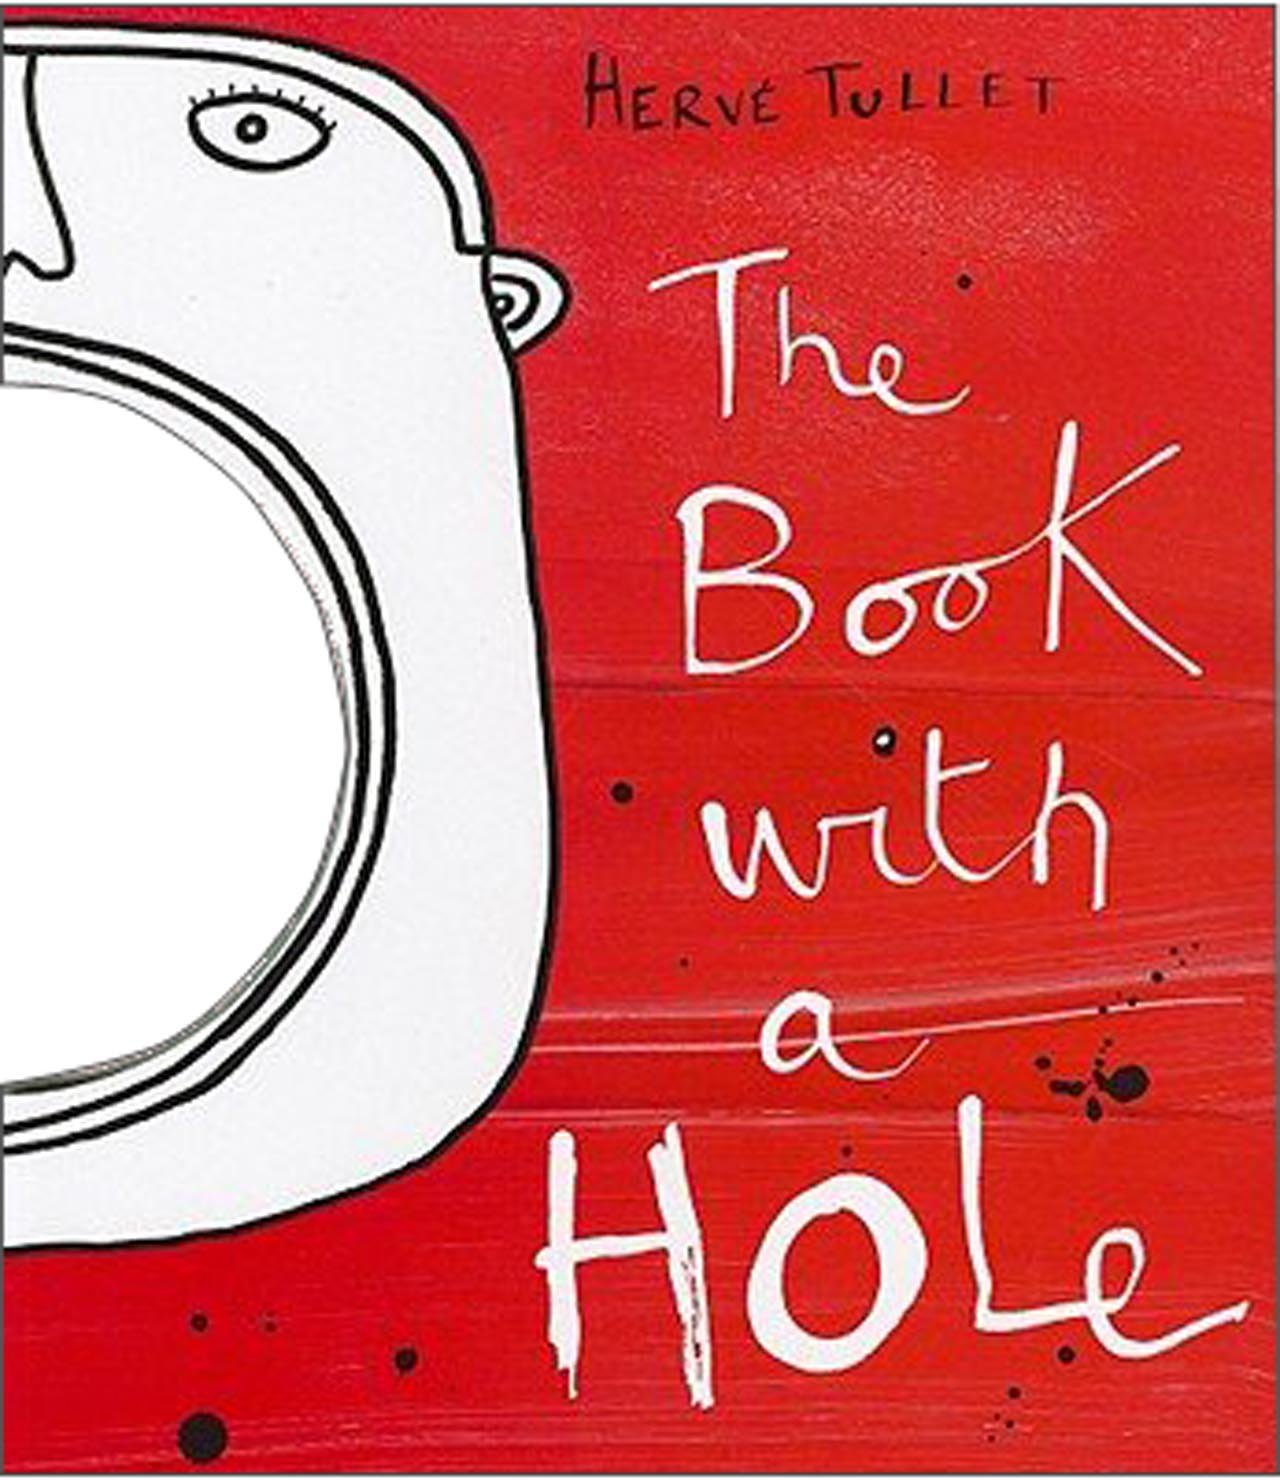 The Book with a Hole - Hervé Tullet